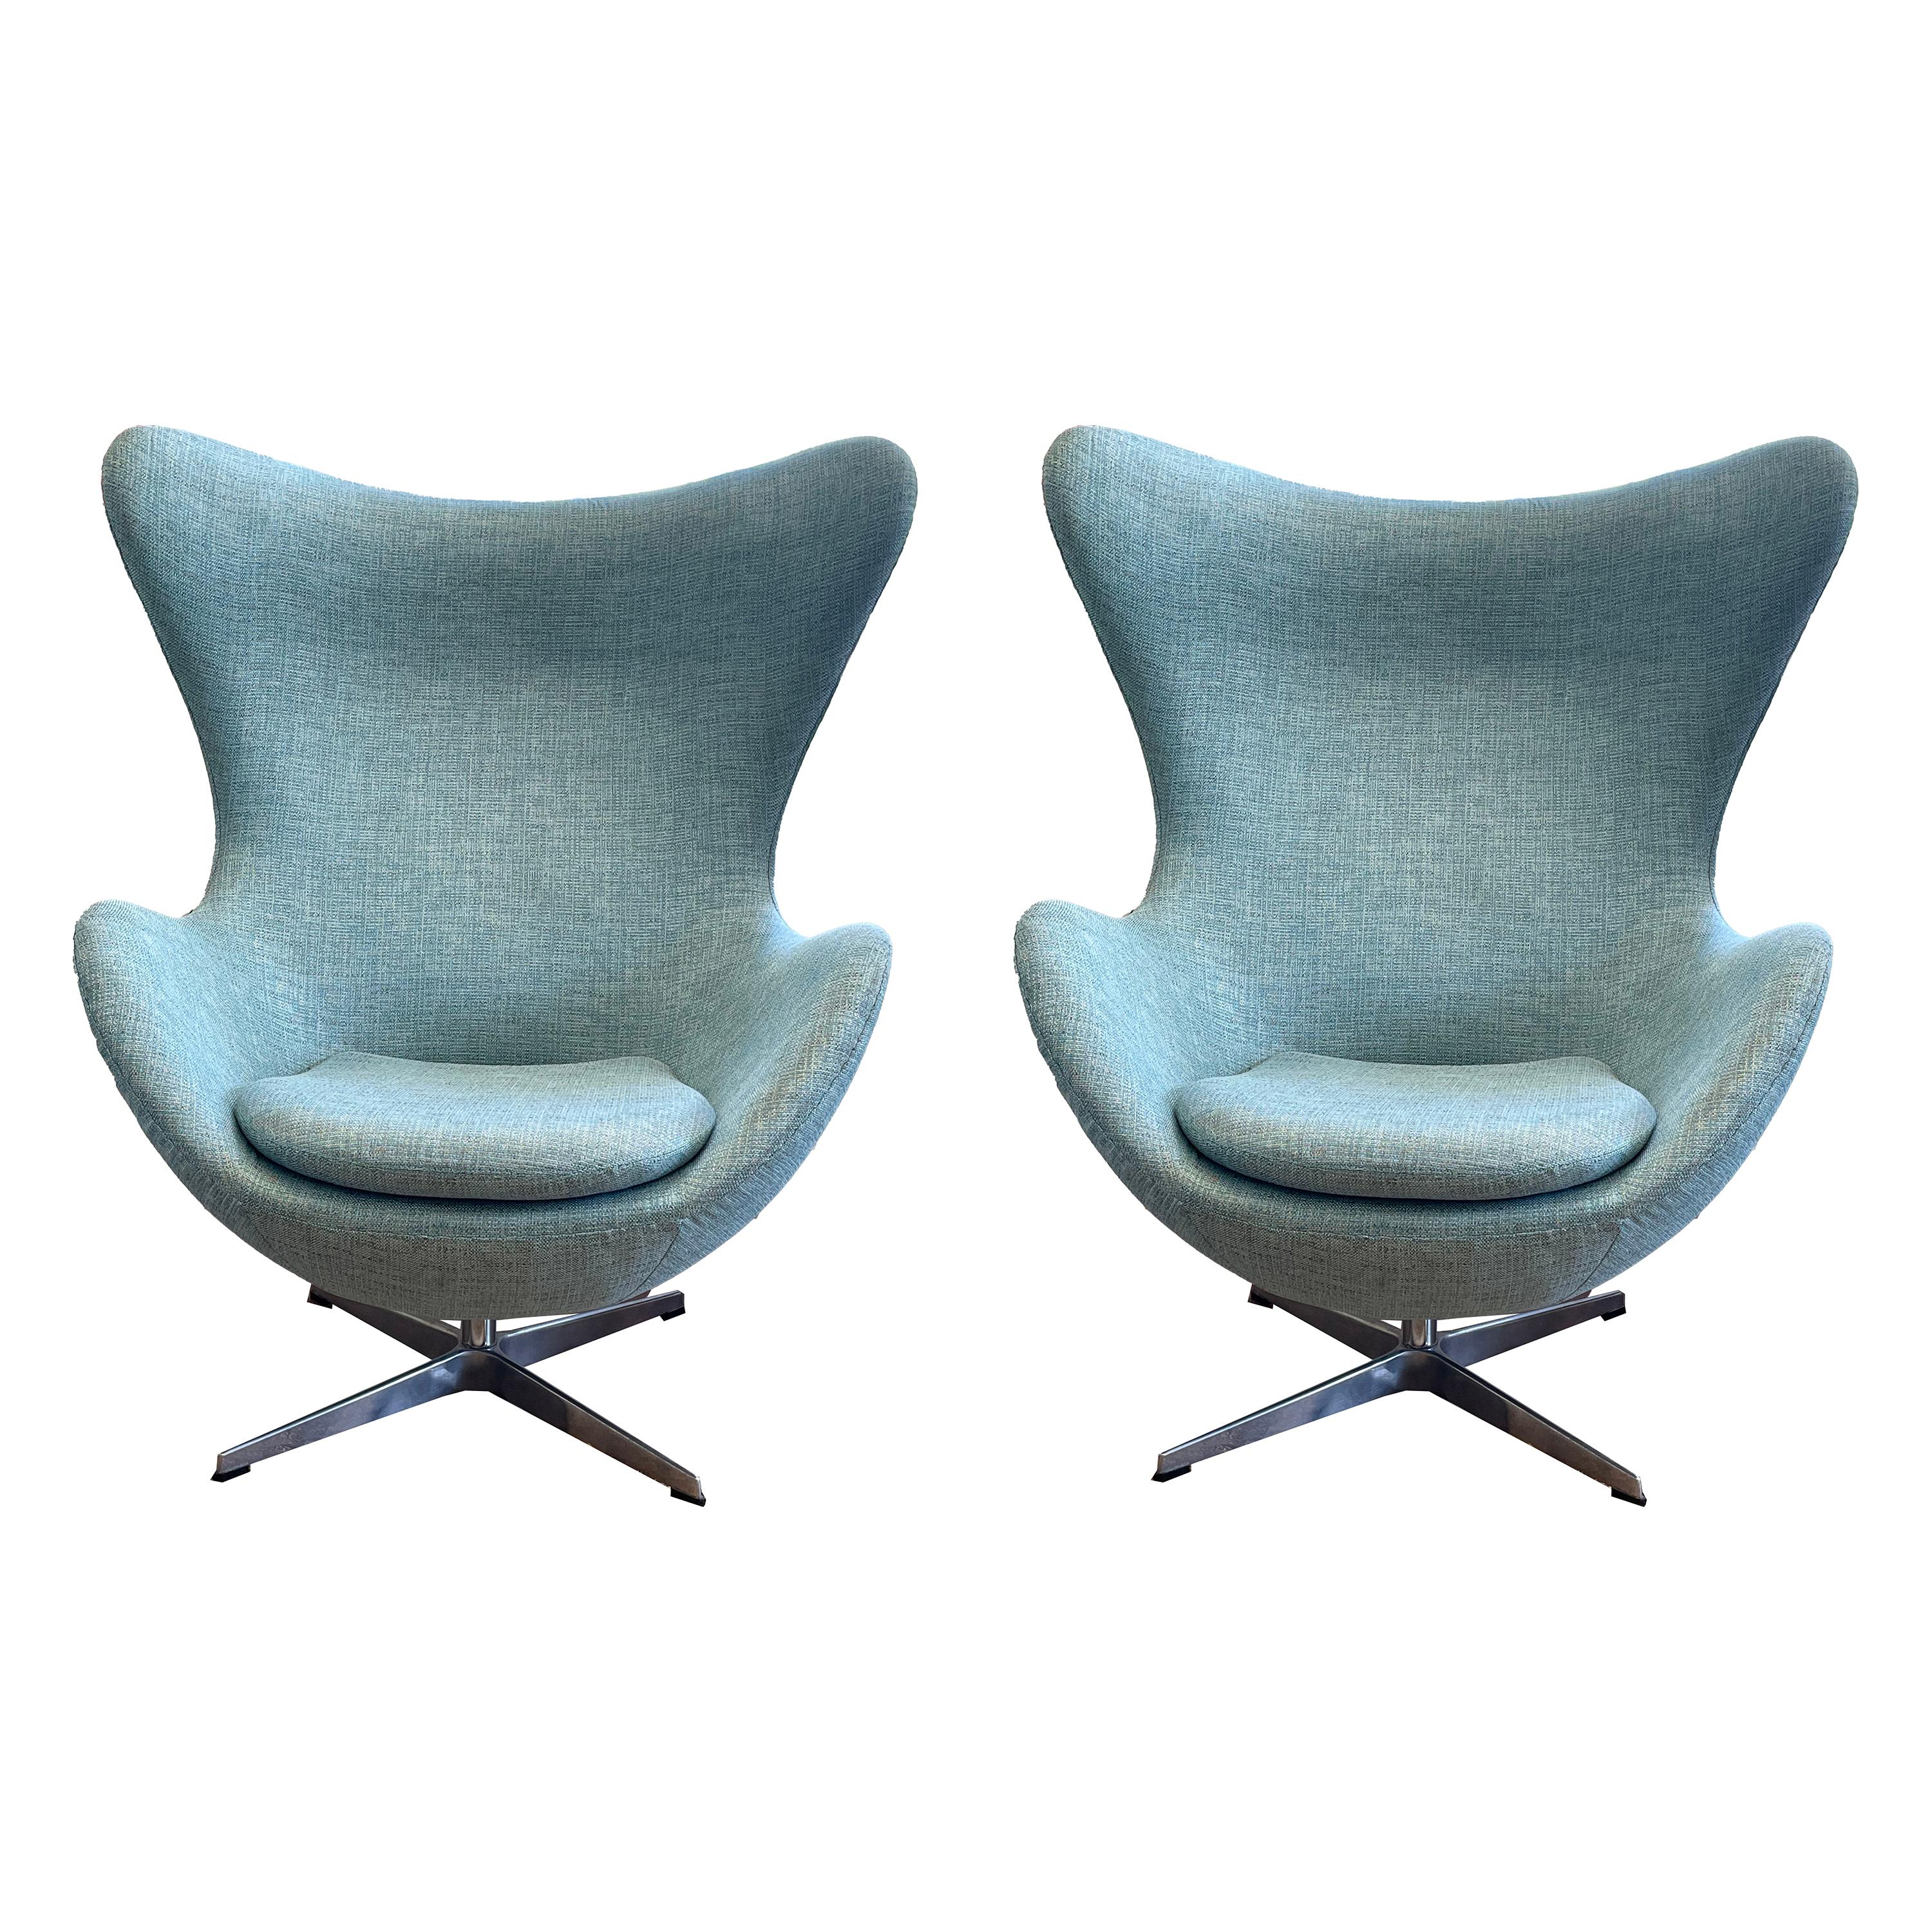 Pair of Arne Jacobsen Style Egg Chairs